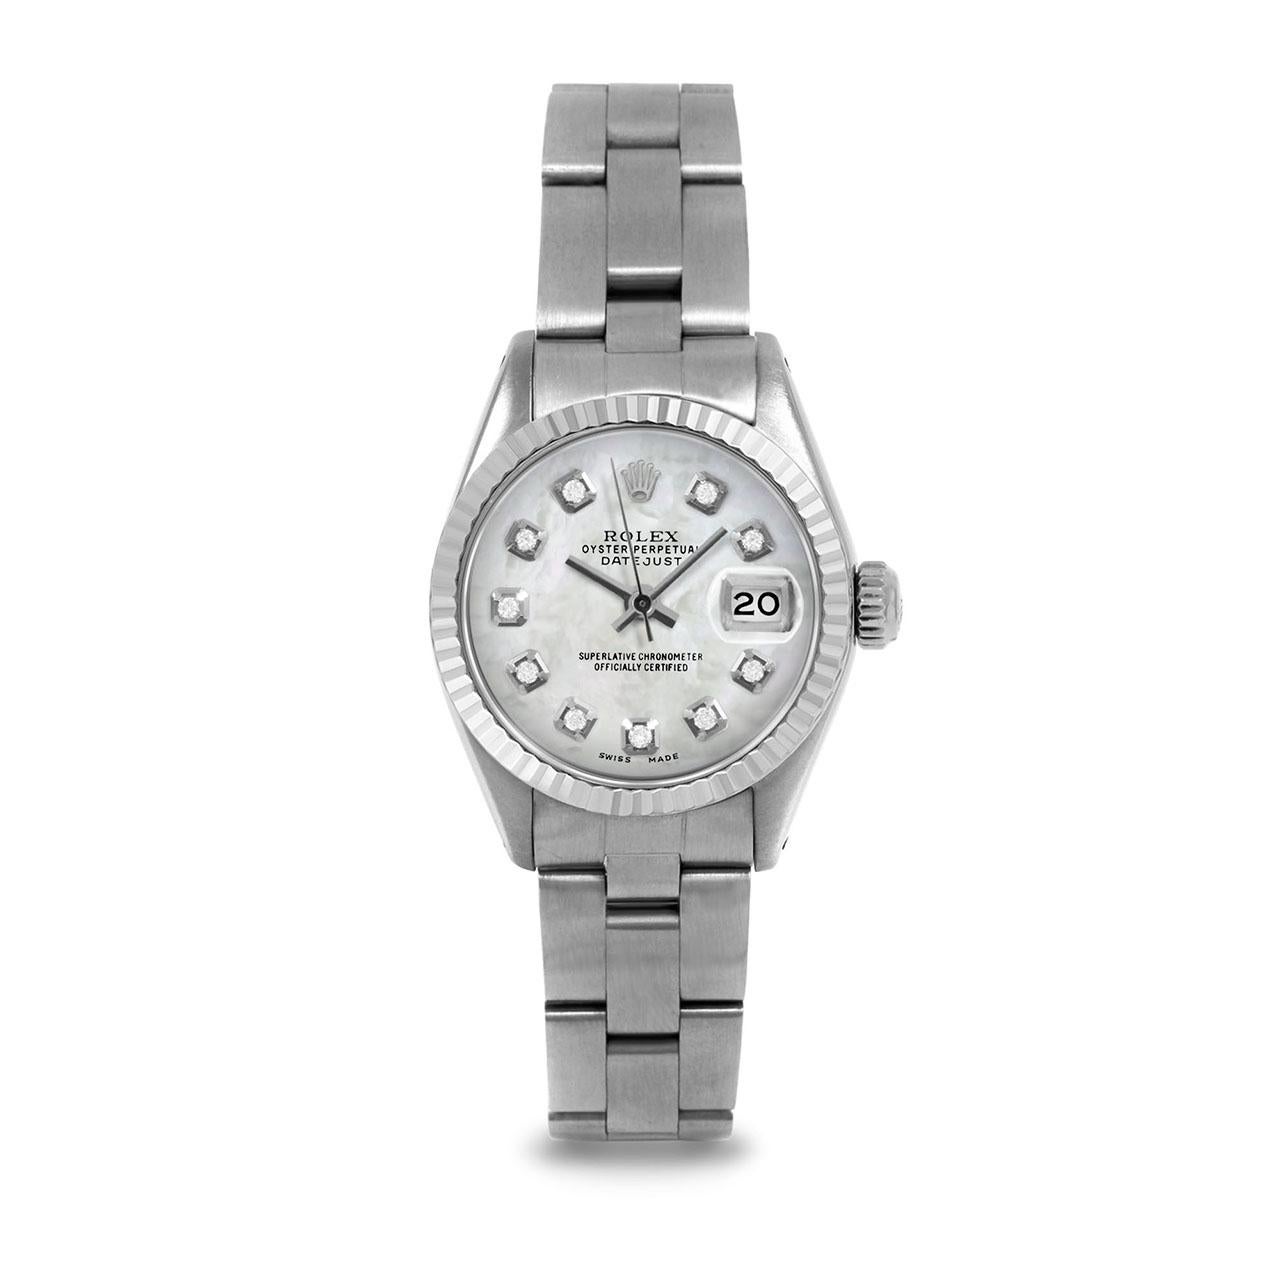 Pre-Owned Rolex 6917 Ladies 26mm Datejust Watch, Custom White Mother of Pearl Diamond Dial & Fluted Bezel on Rolex Stainless Steel Oyster Band.   

SKU 6917-SS-WMOP-DIA-AM-FLT-OYS


Brand/Model:        Rolex Datejust
Model Number:        6917
Style: